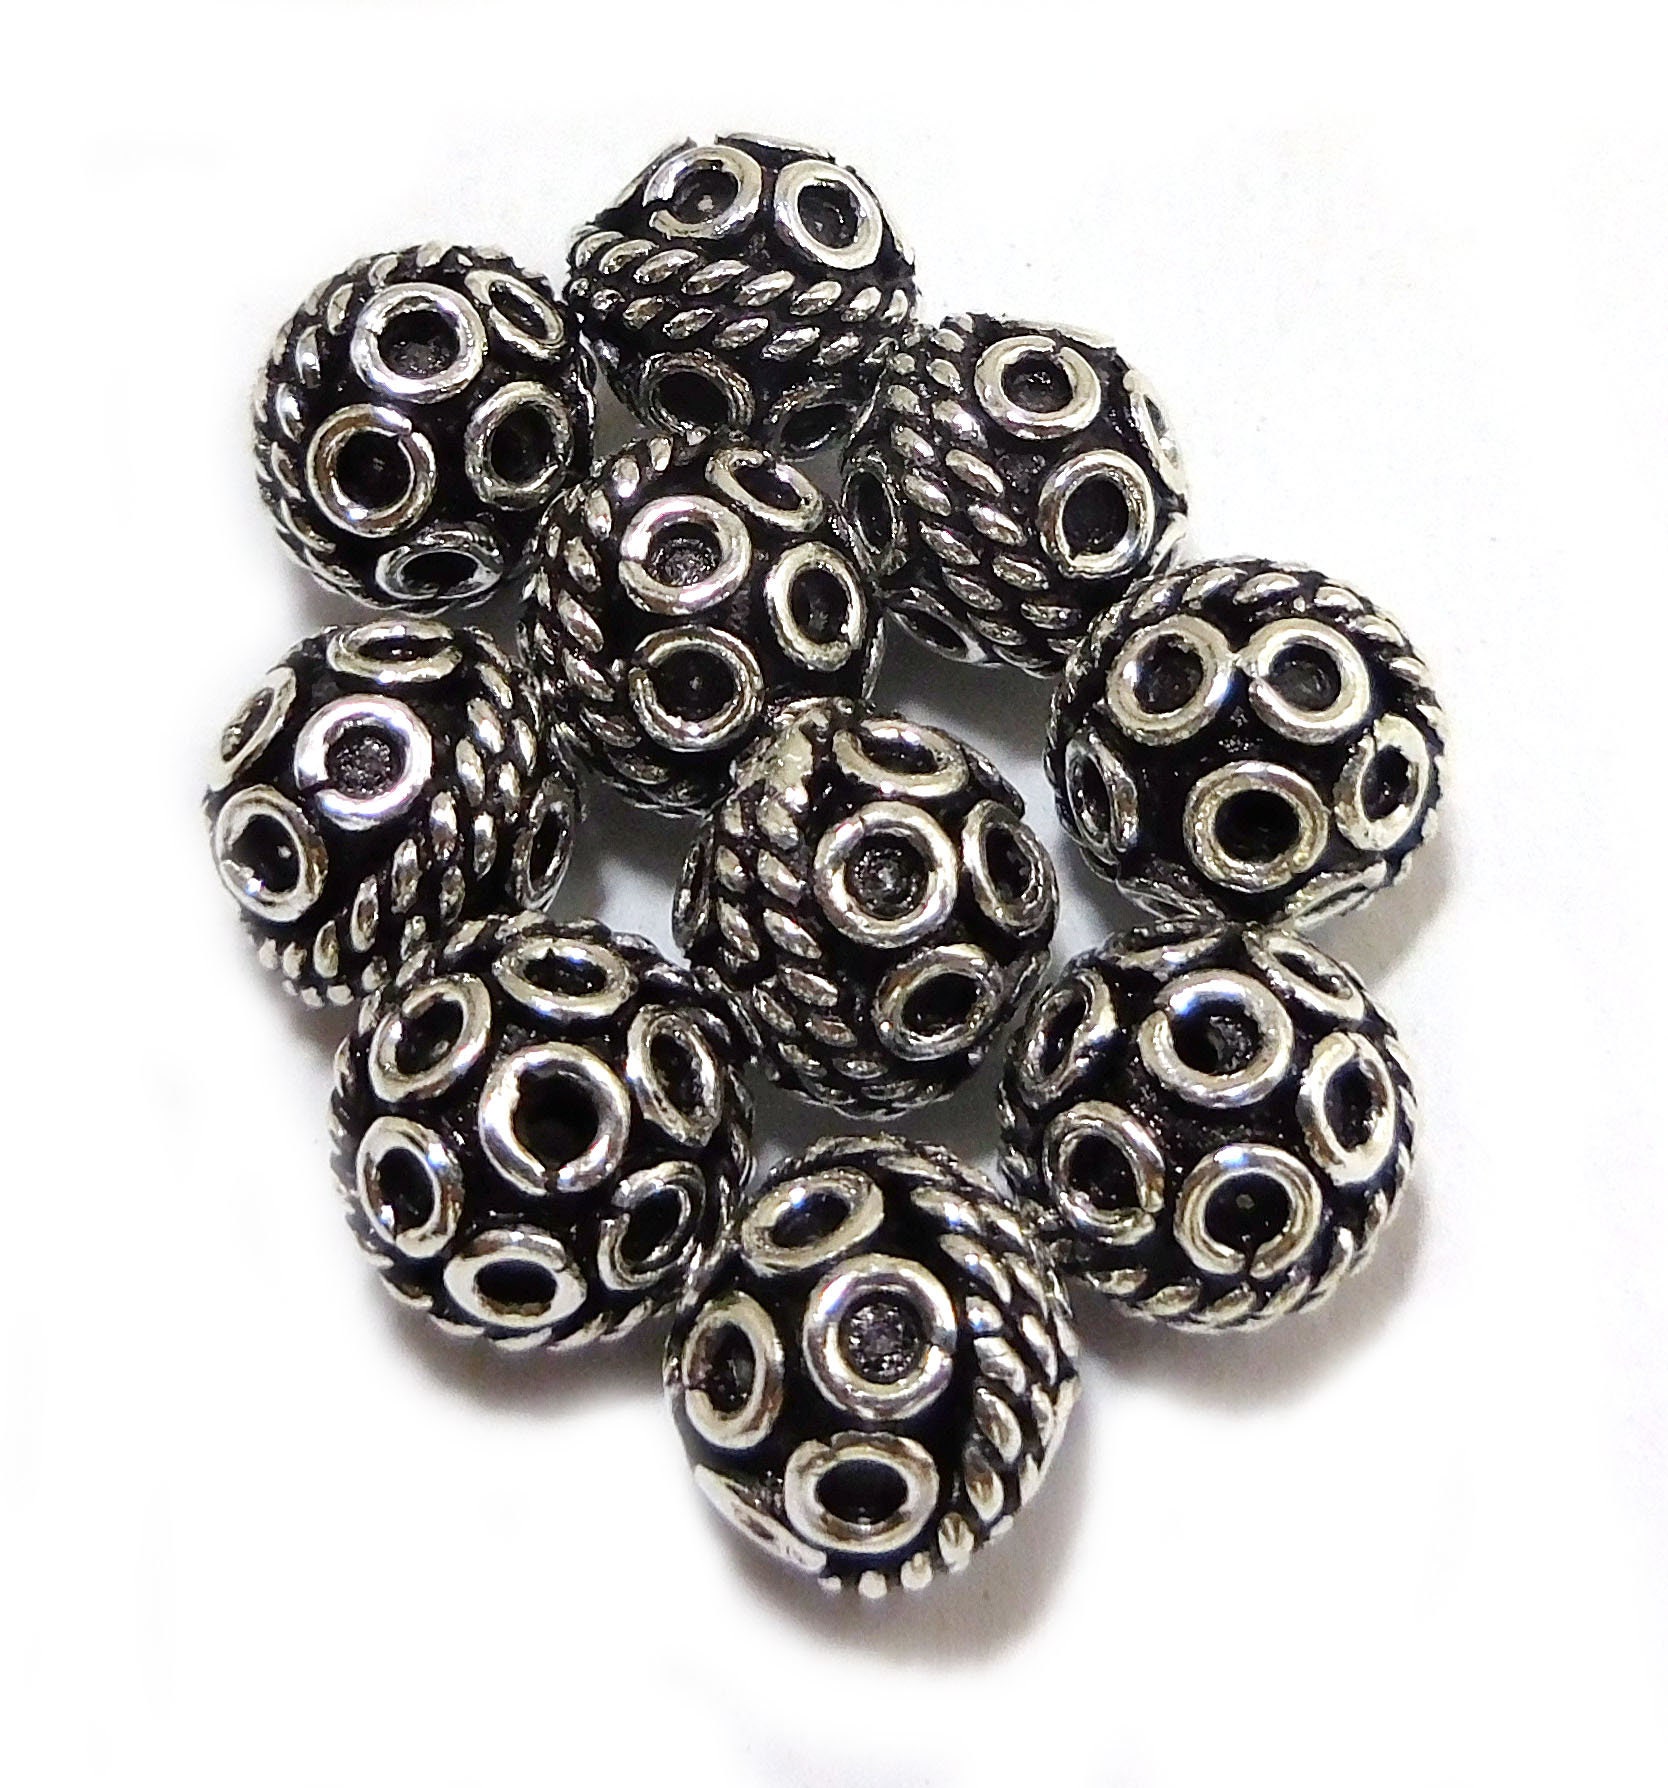 8mm 10mm Solid Copper Bali Bead Antique Sterling Silver Plated - Etsy